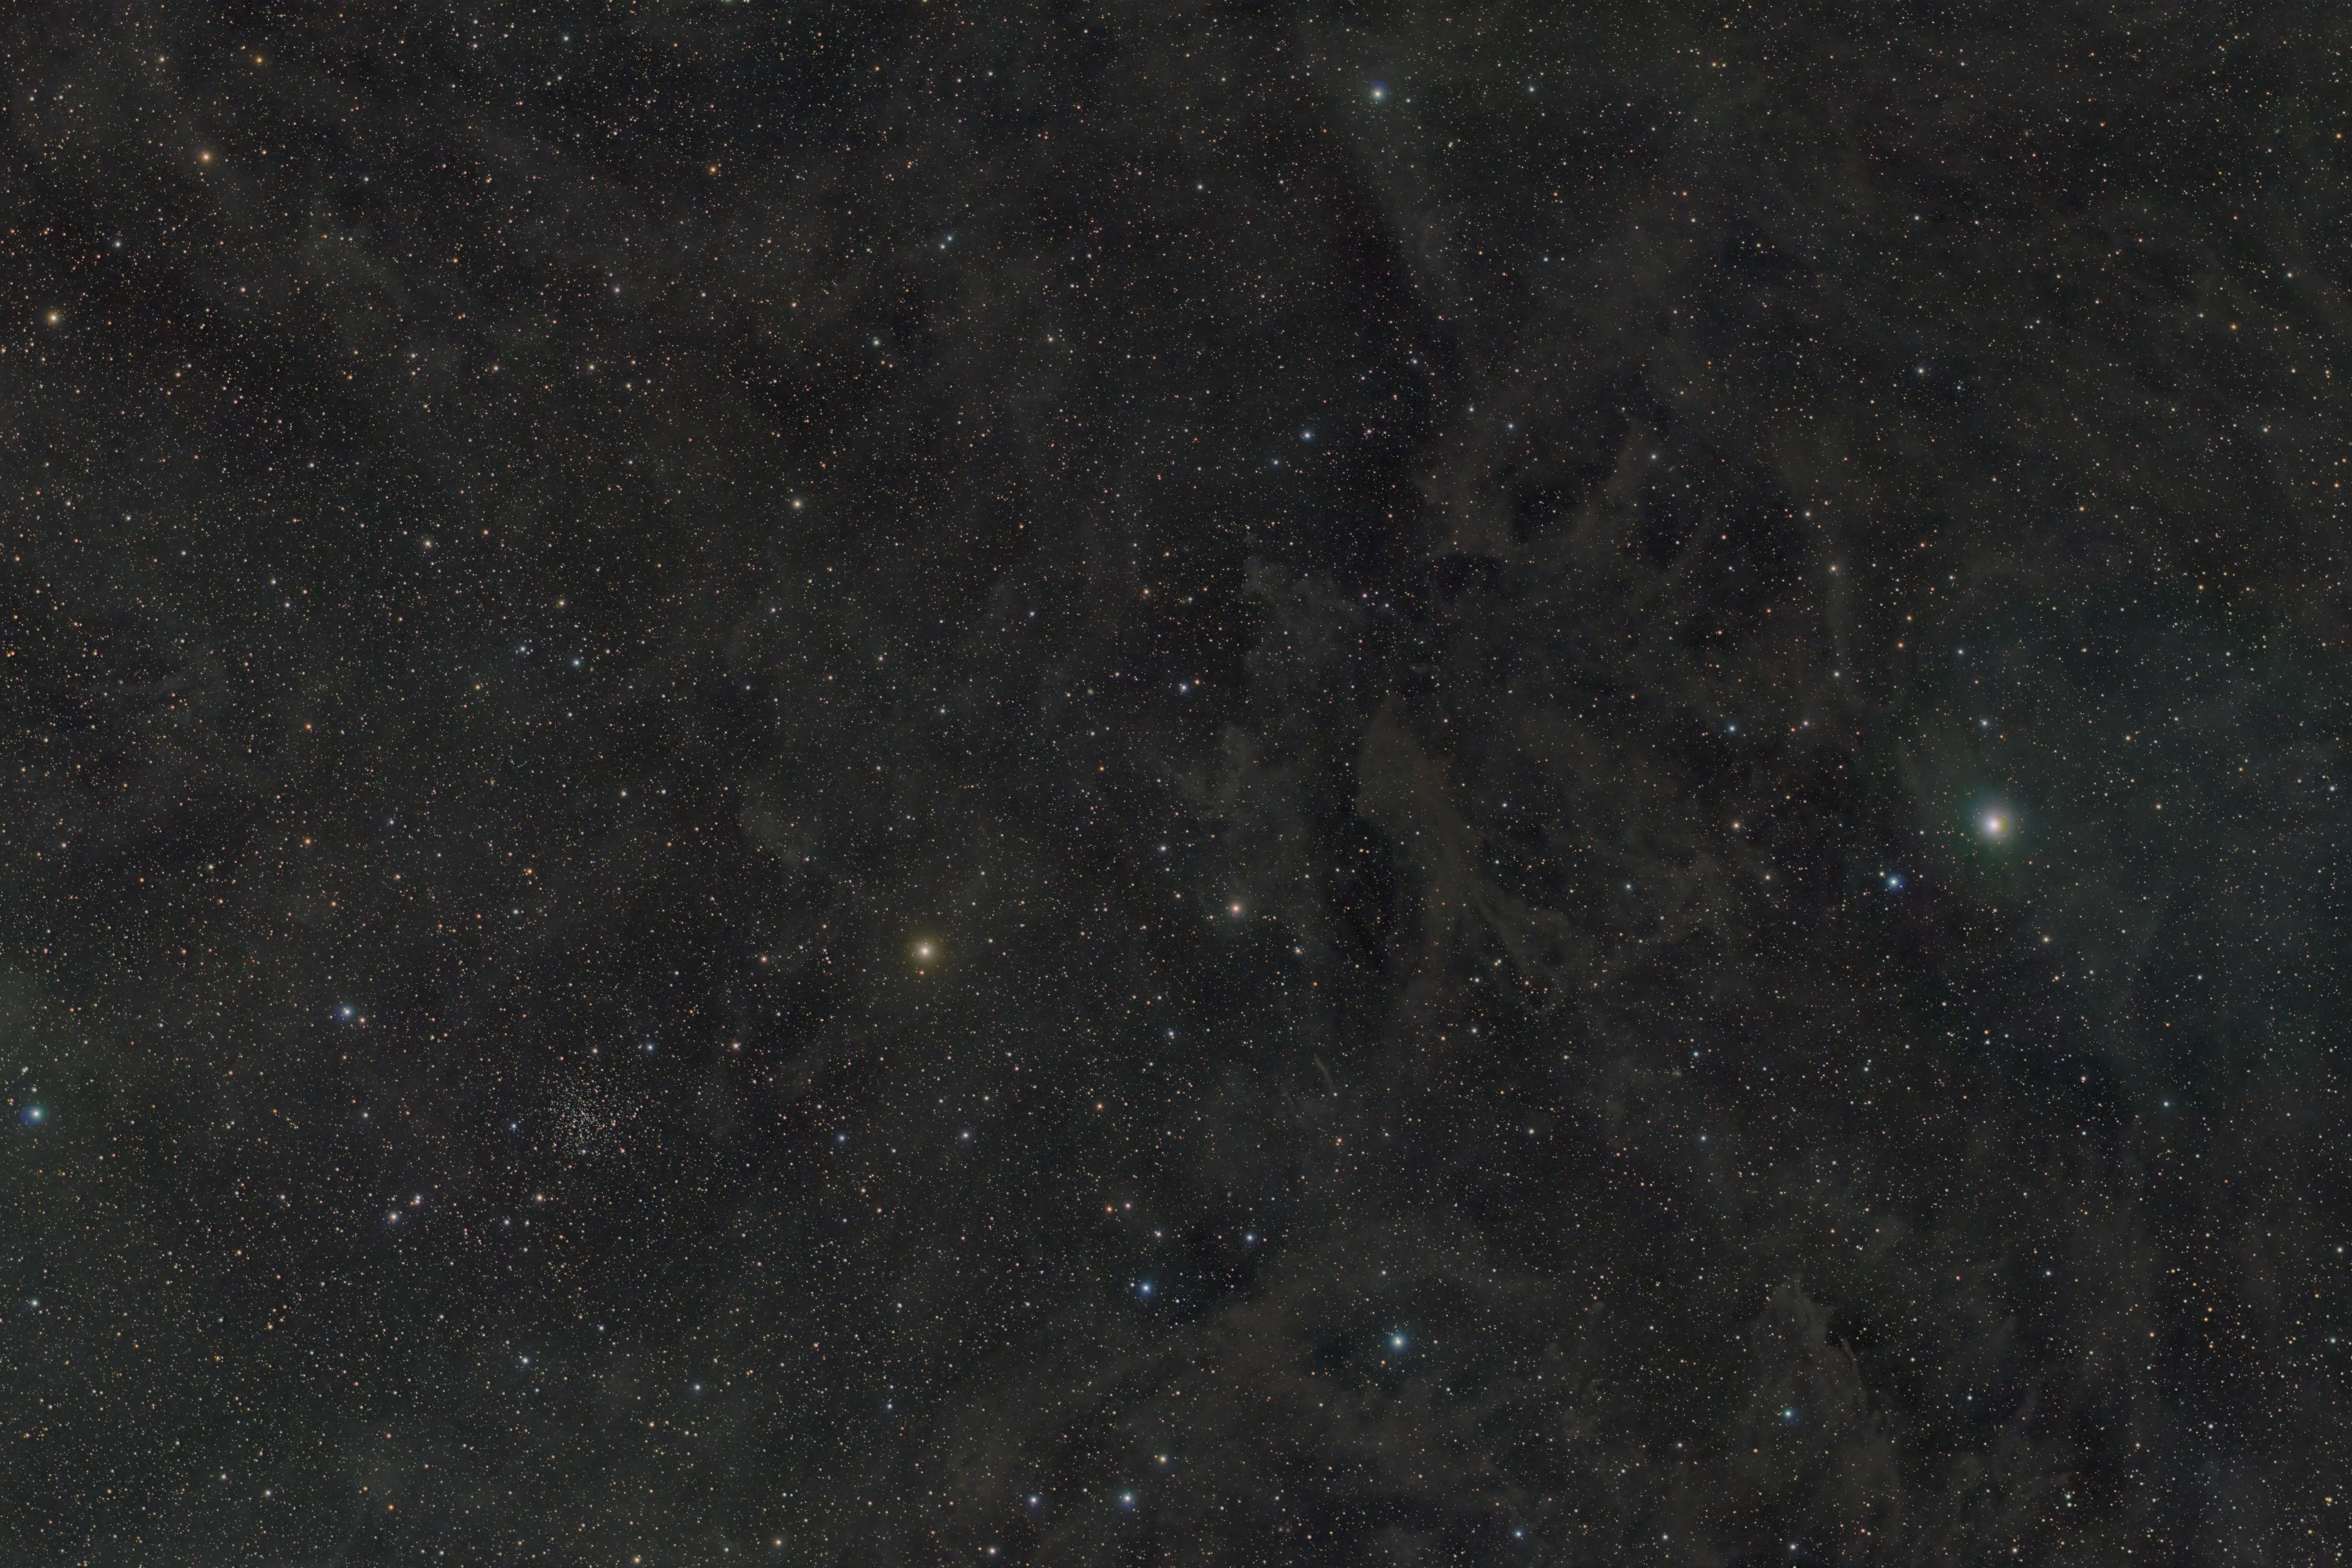 NGC 188 and IFN in Cepheus